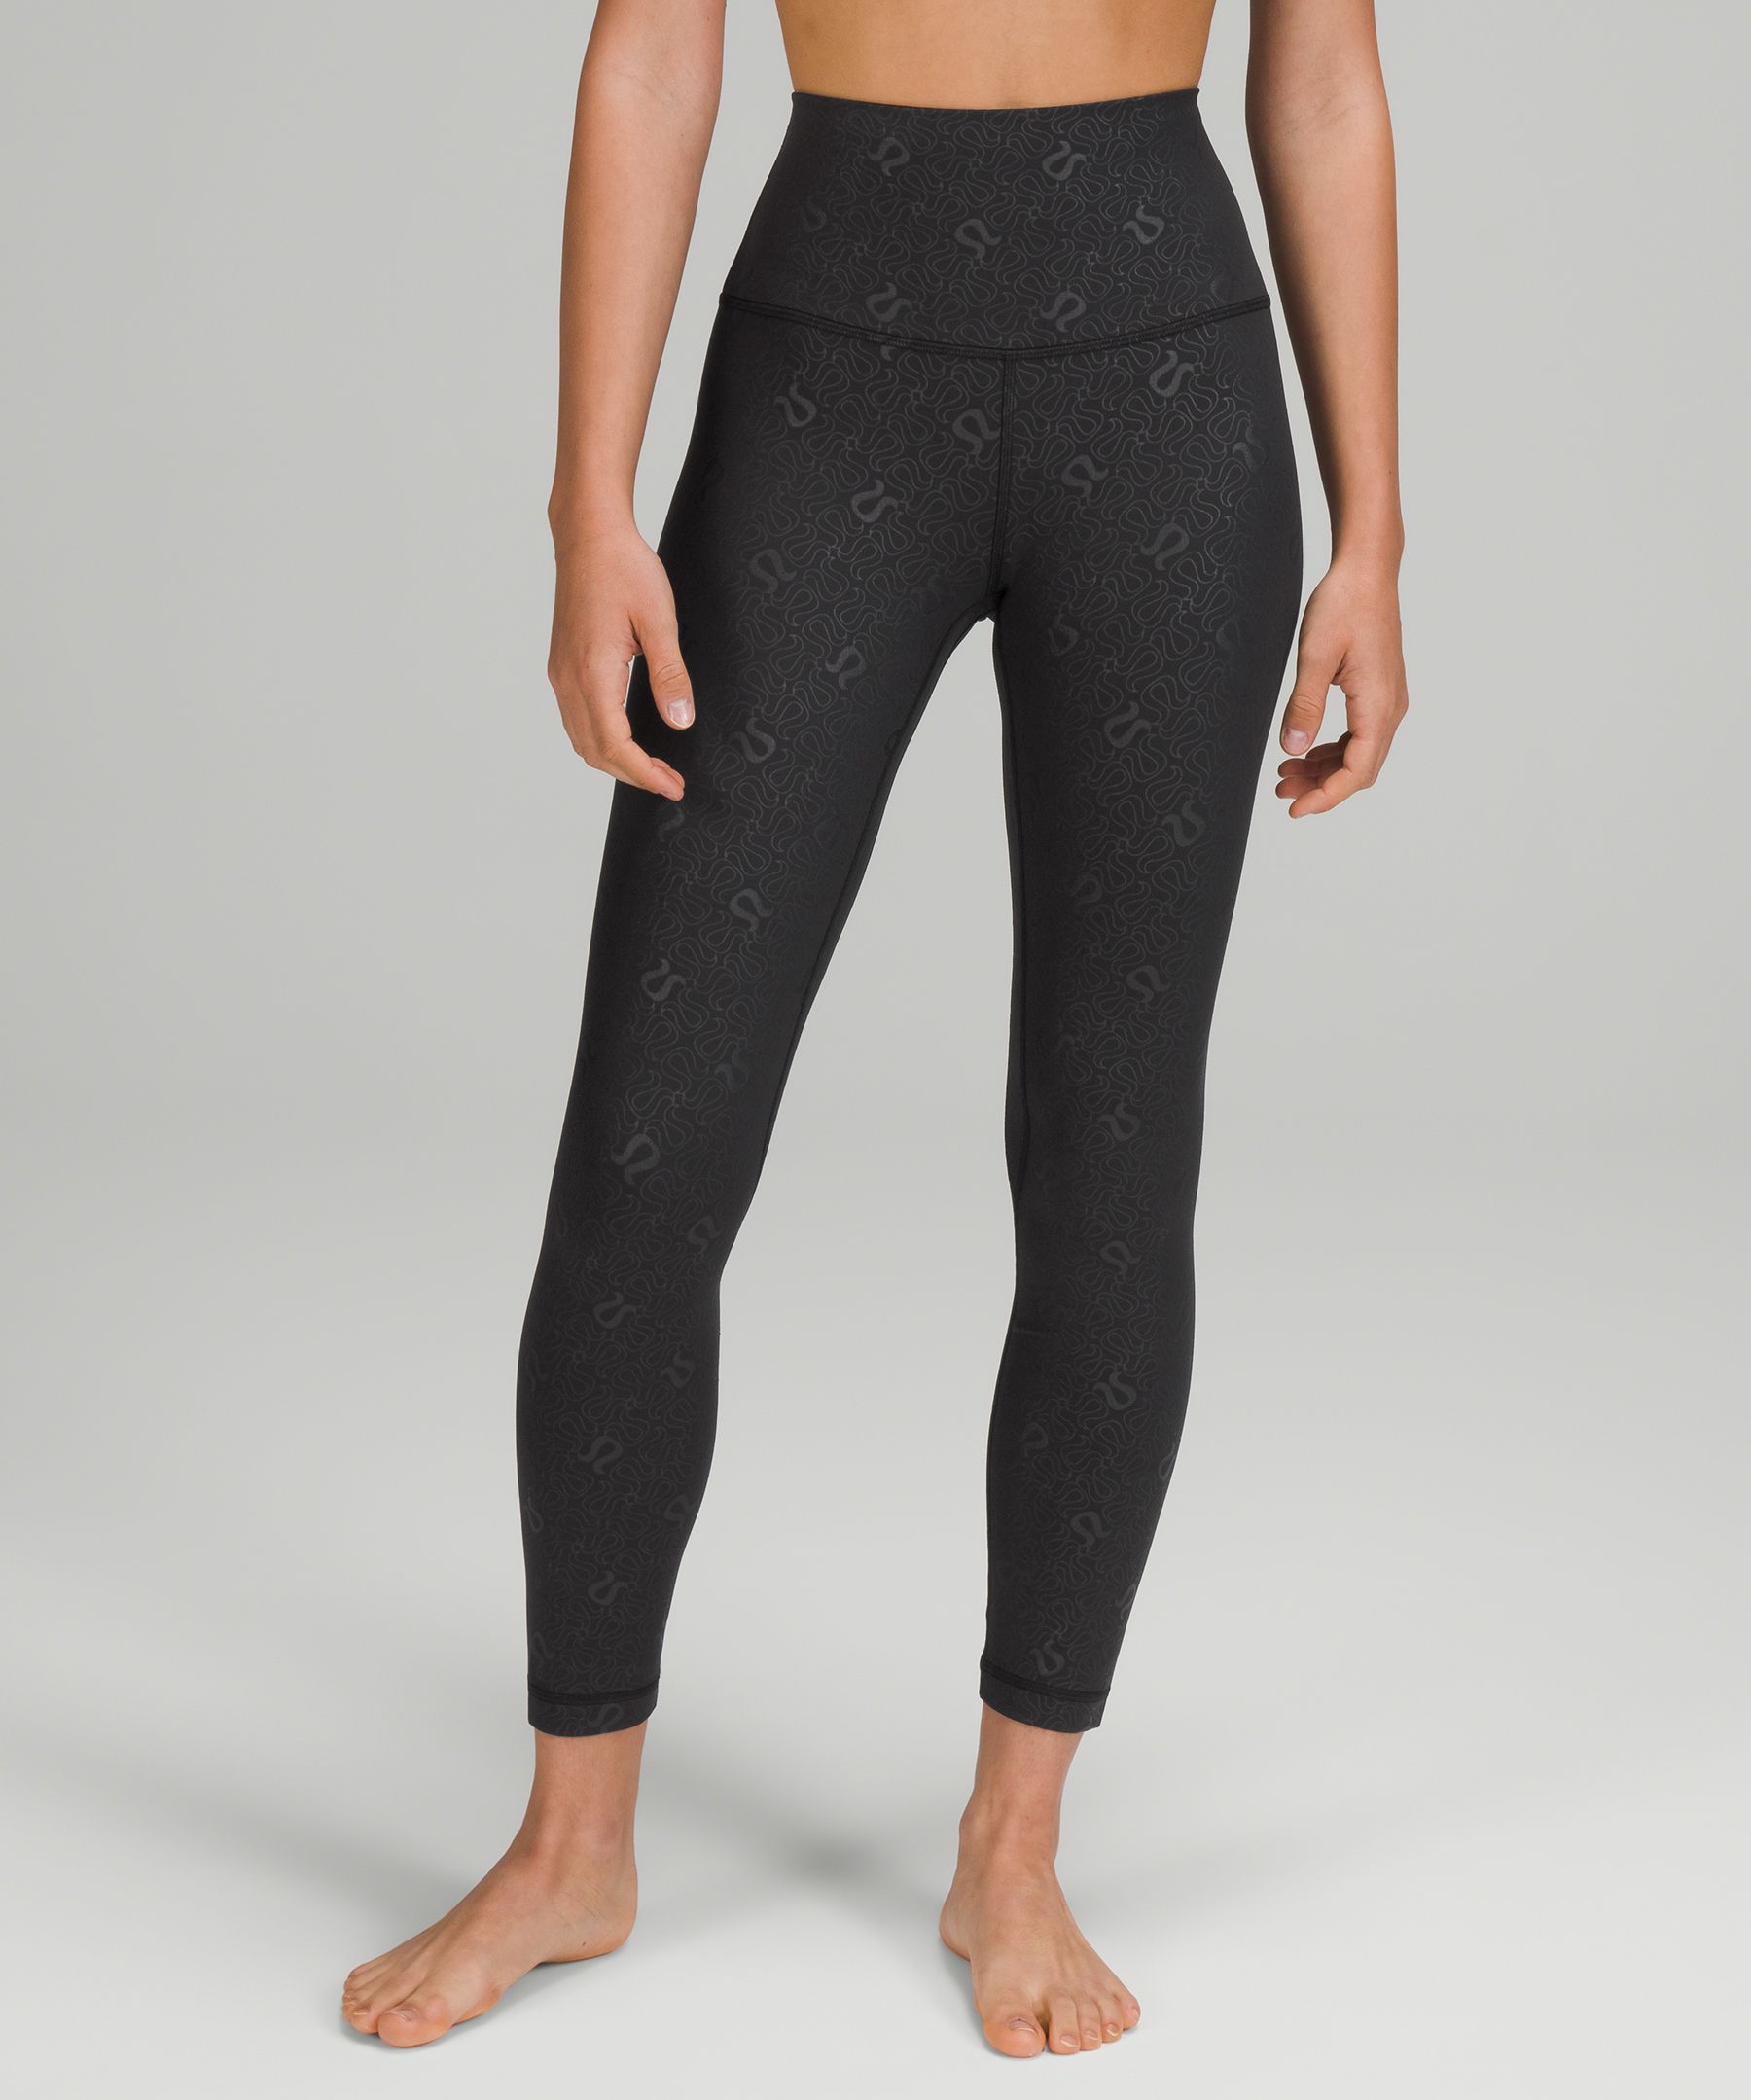 Lululemon Align High-Rise Pants 25” - Size 8 - $72 New With Tags - From Gel